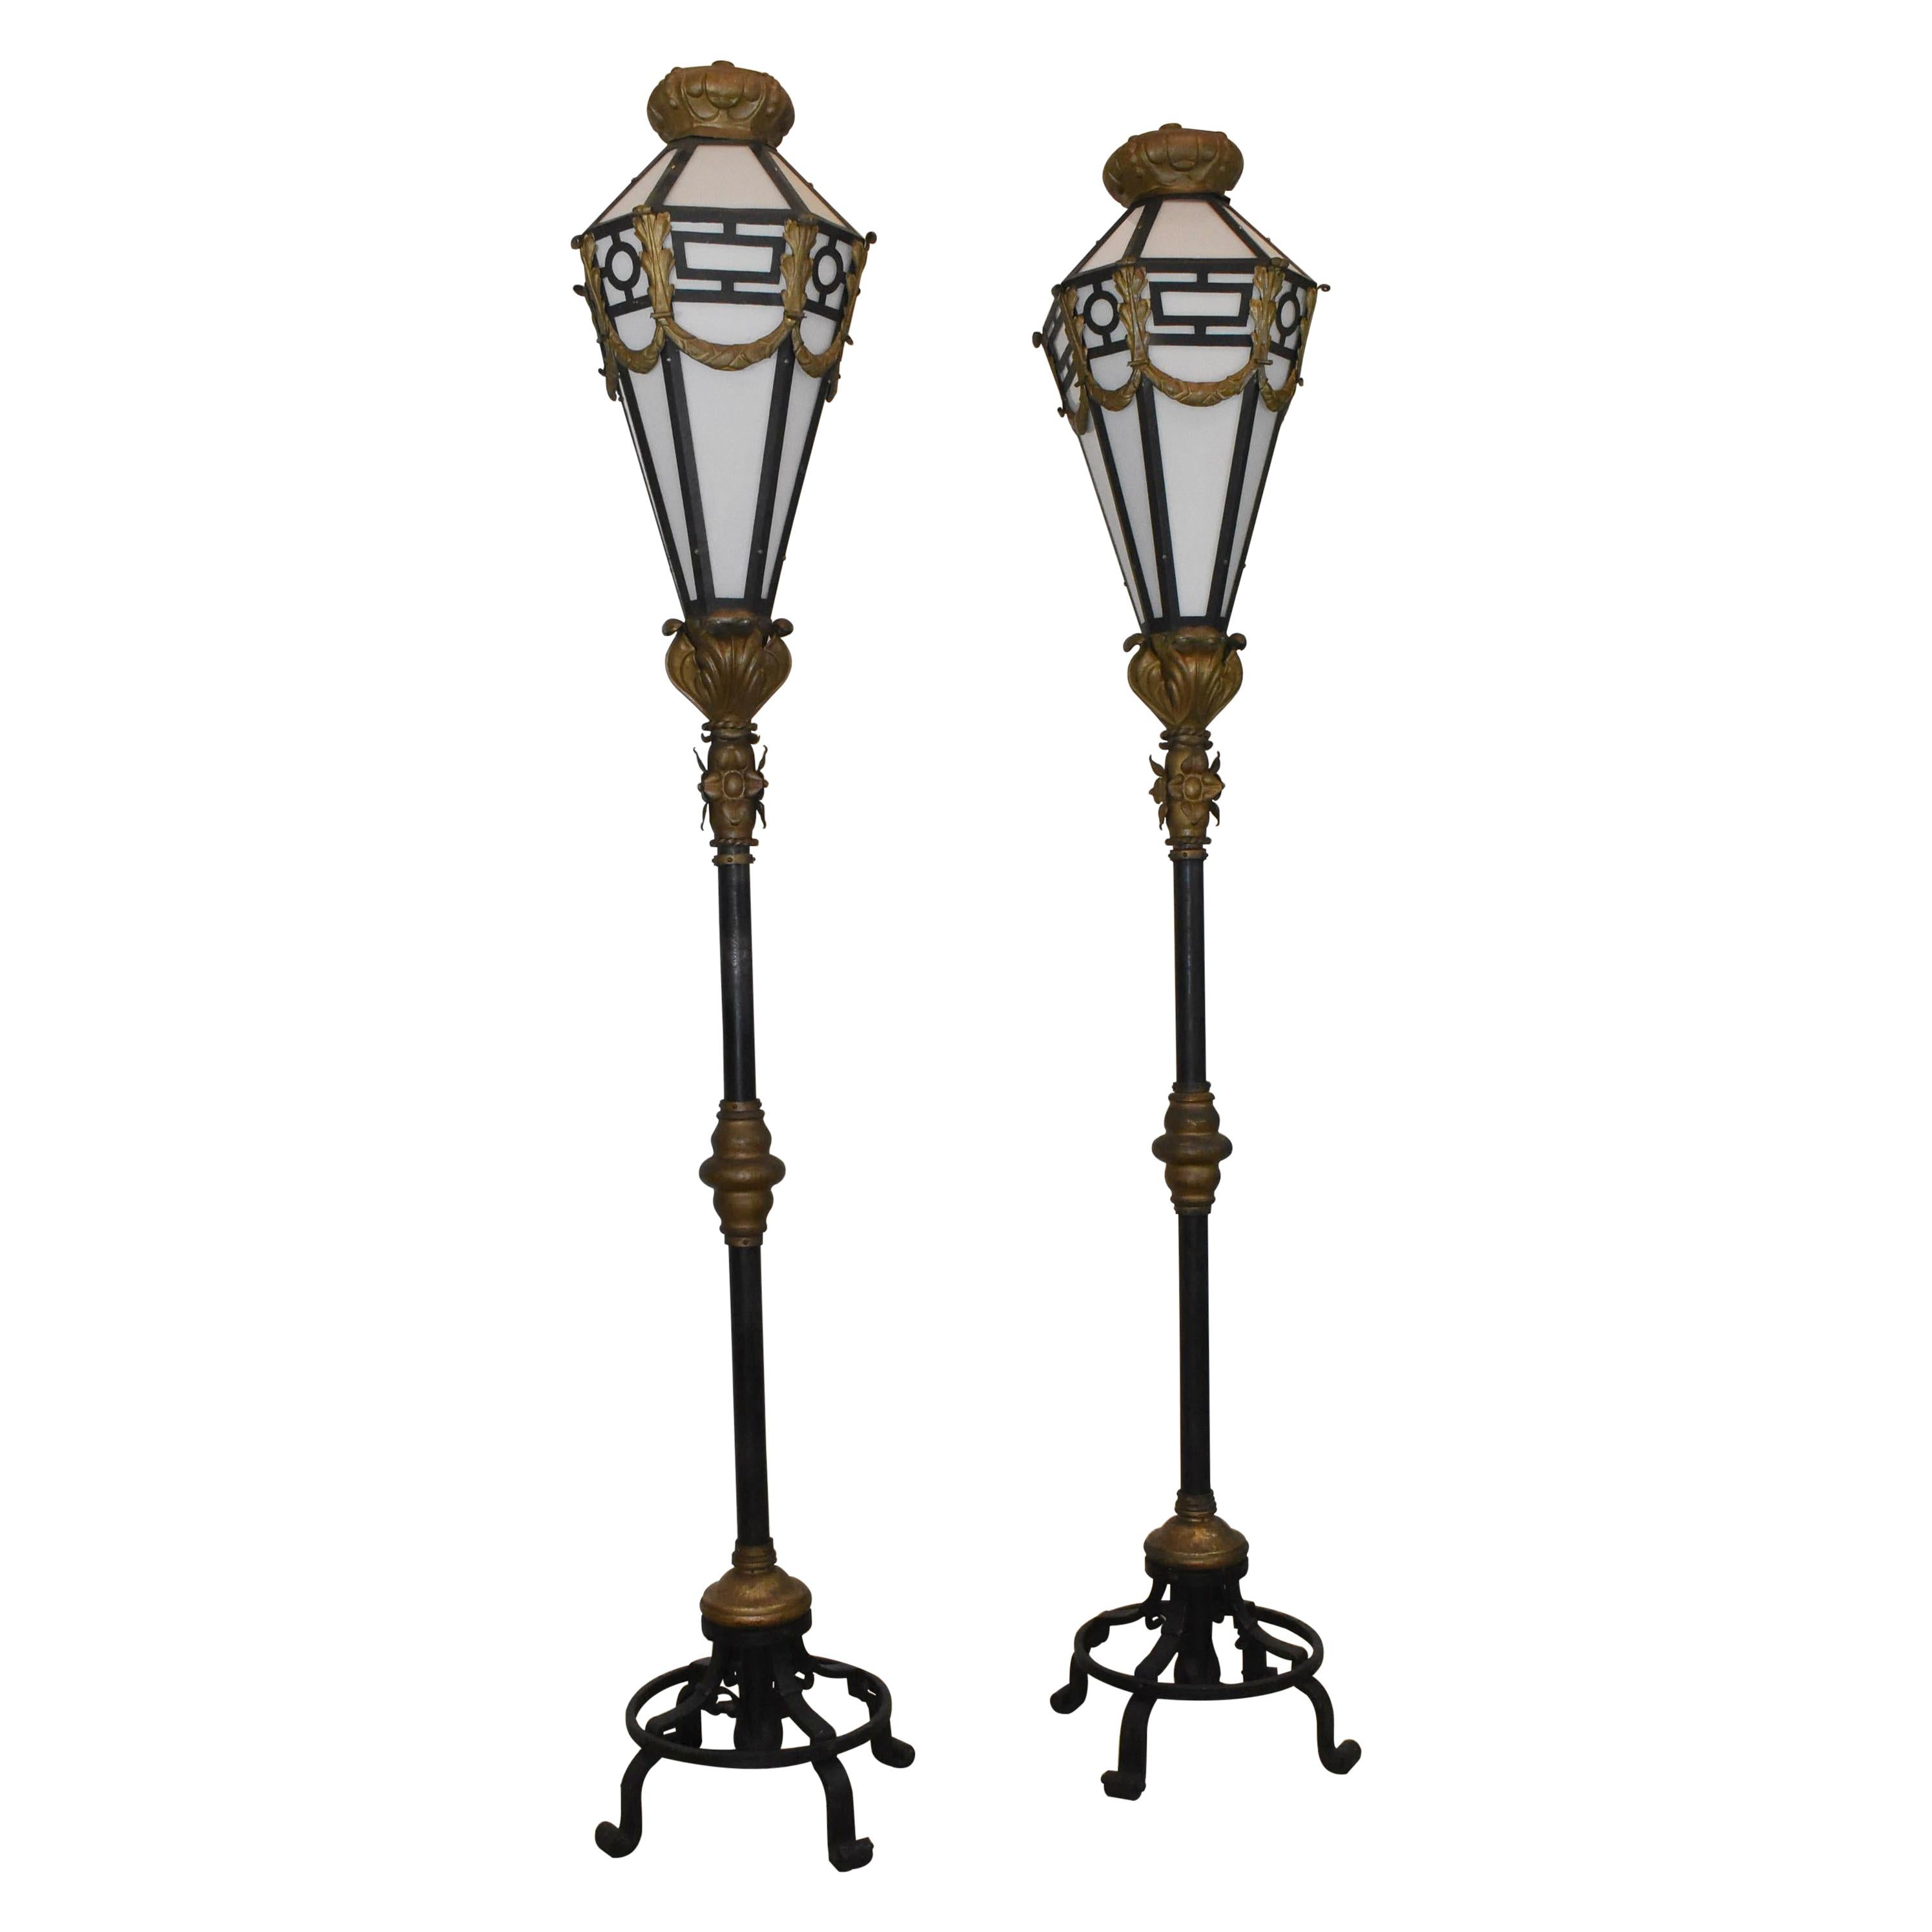 Pair of French Style Wrought Iron and Brass Street Lamps